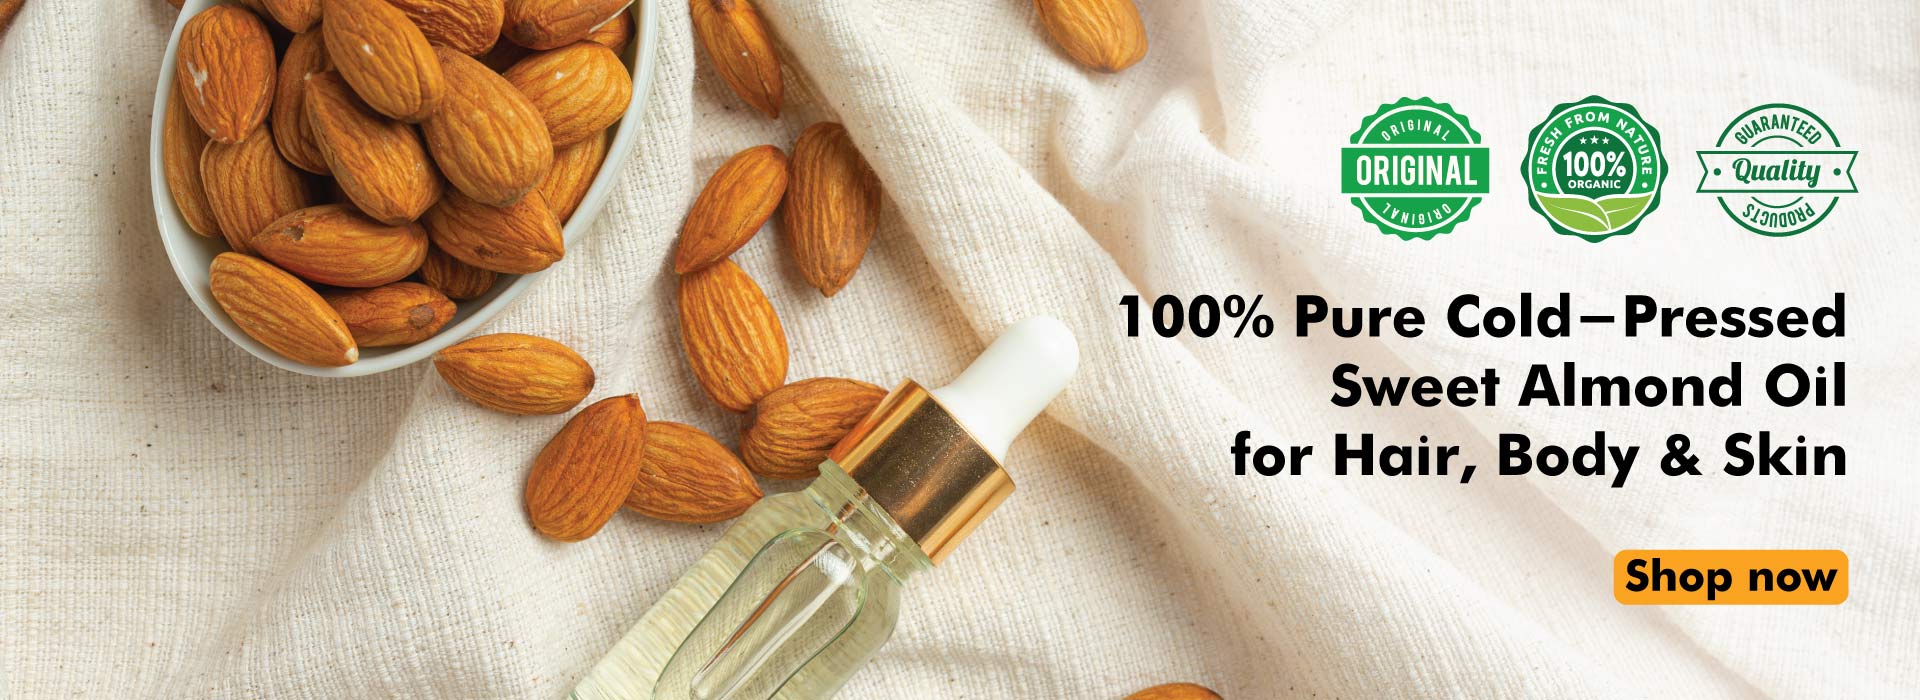 100% Pure Cold-Pressed Sweet Almond Oil for Hair, Body & Skin